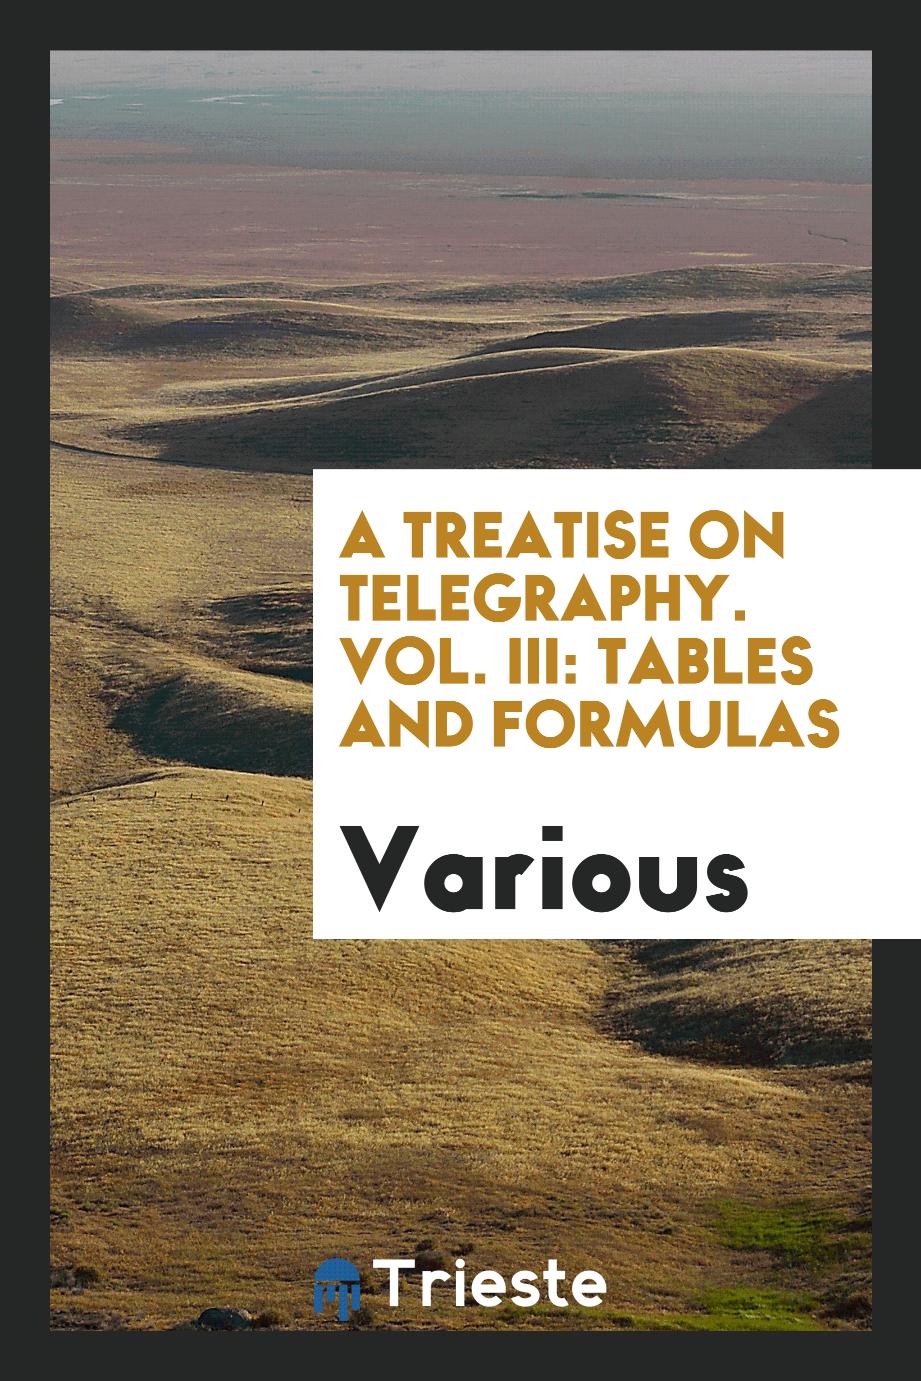 A Treatise on Telegraphy. Vol. III: Tables and Formulas